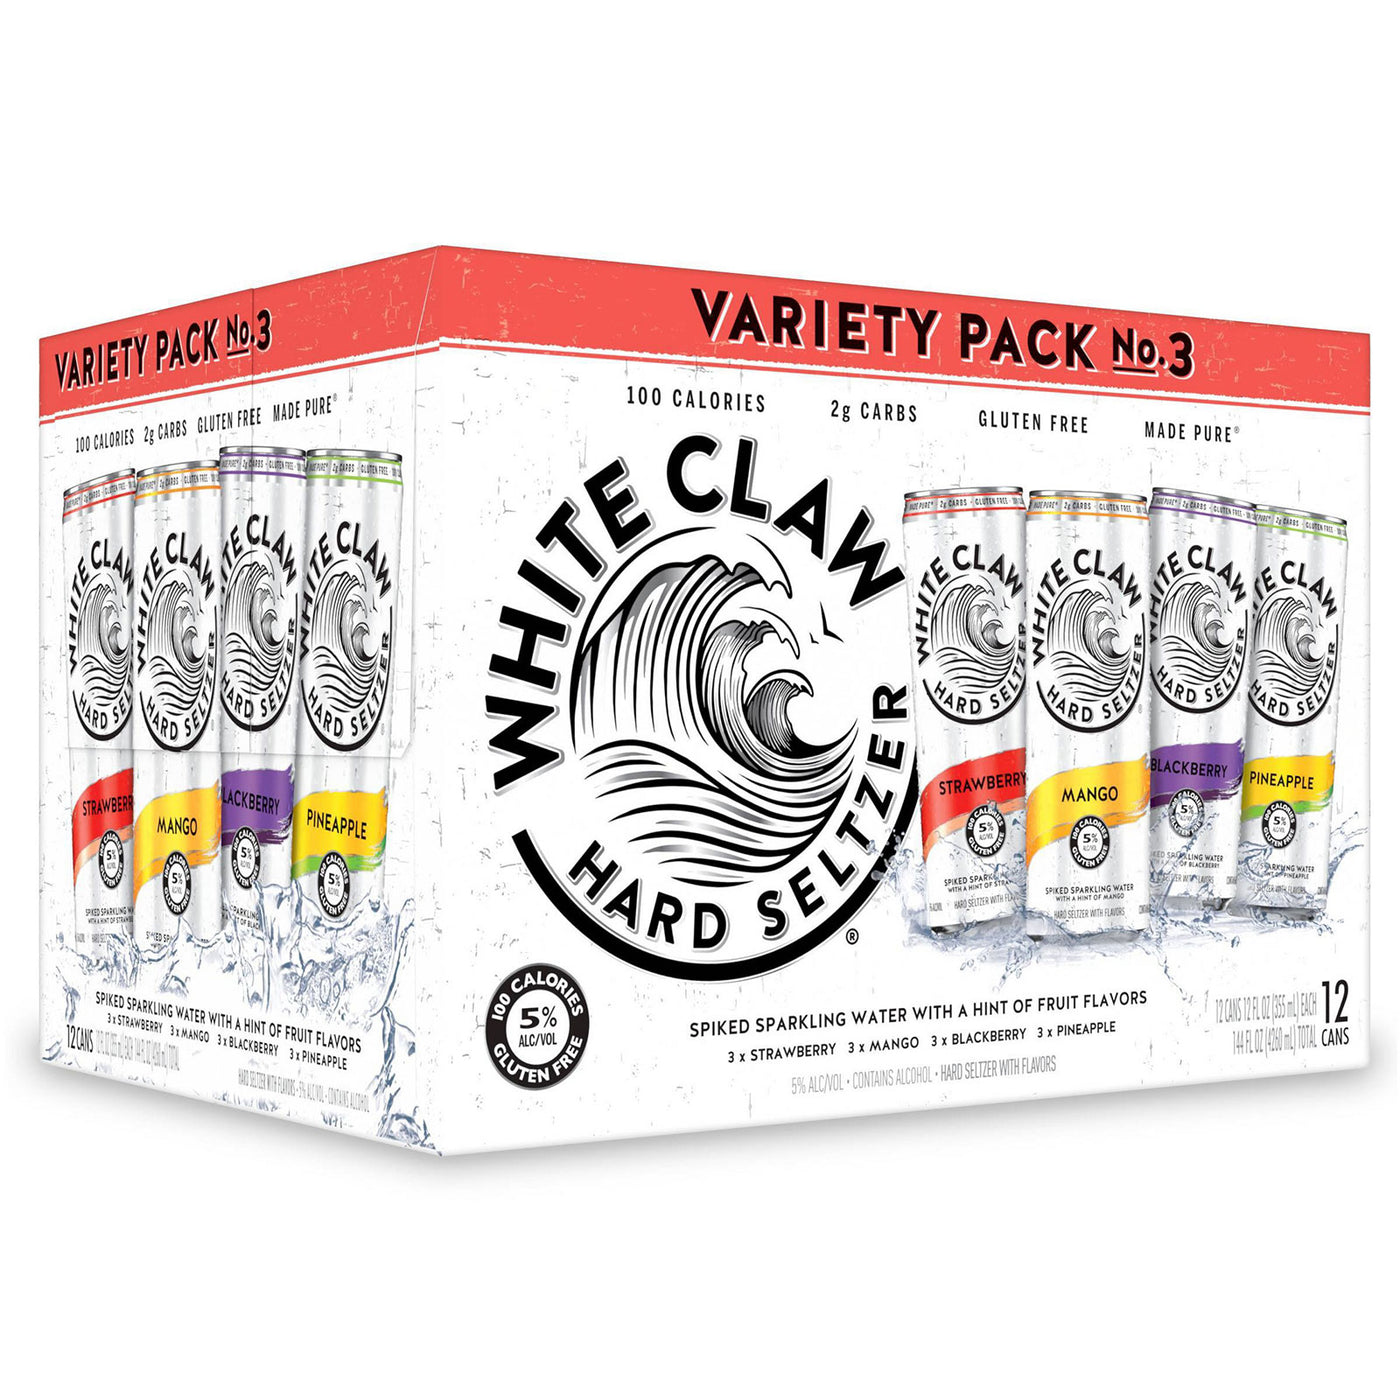 White Claw Variety Pack No. 3